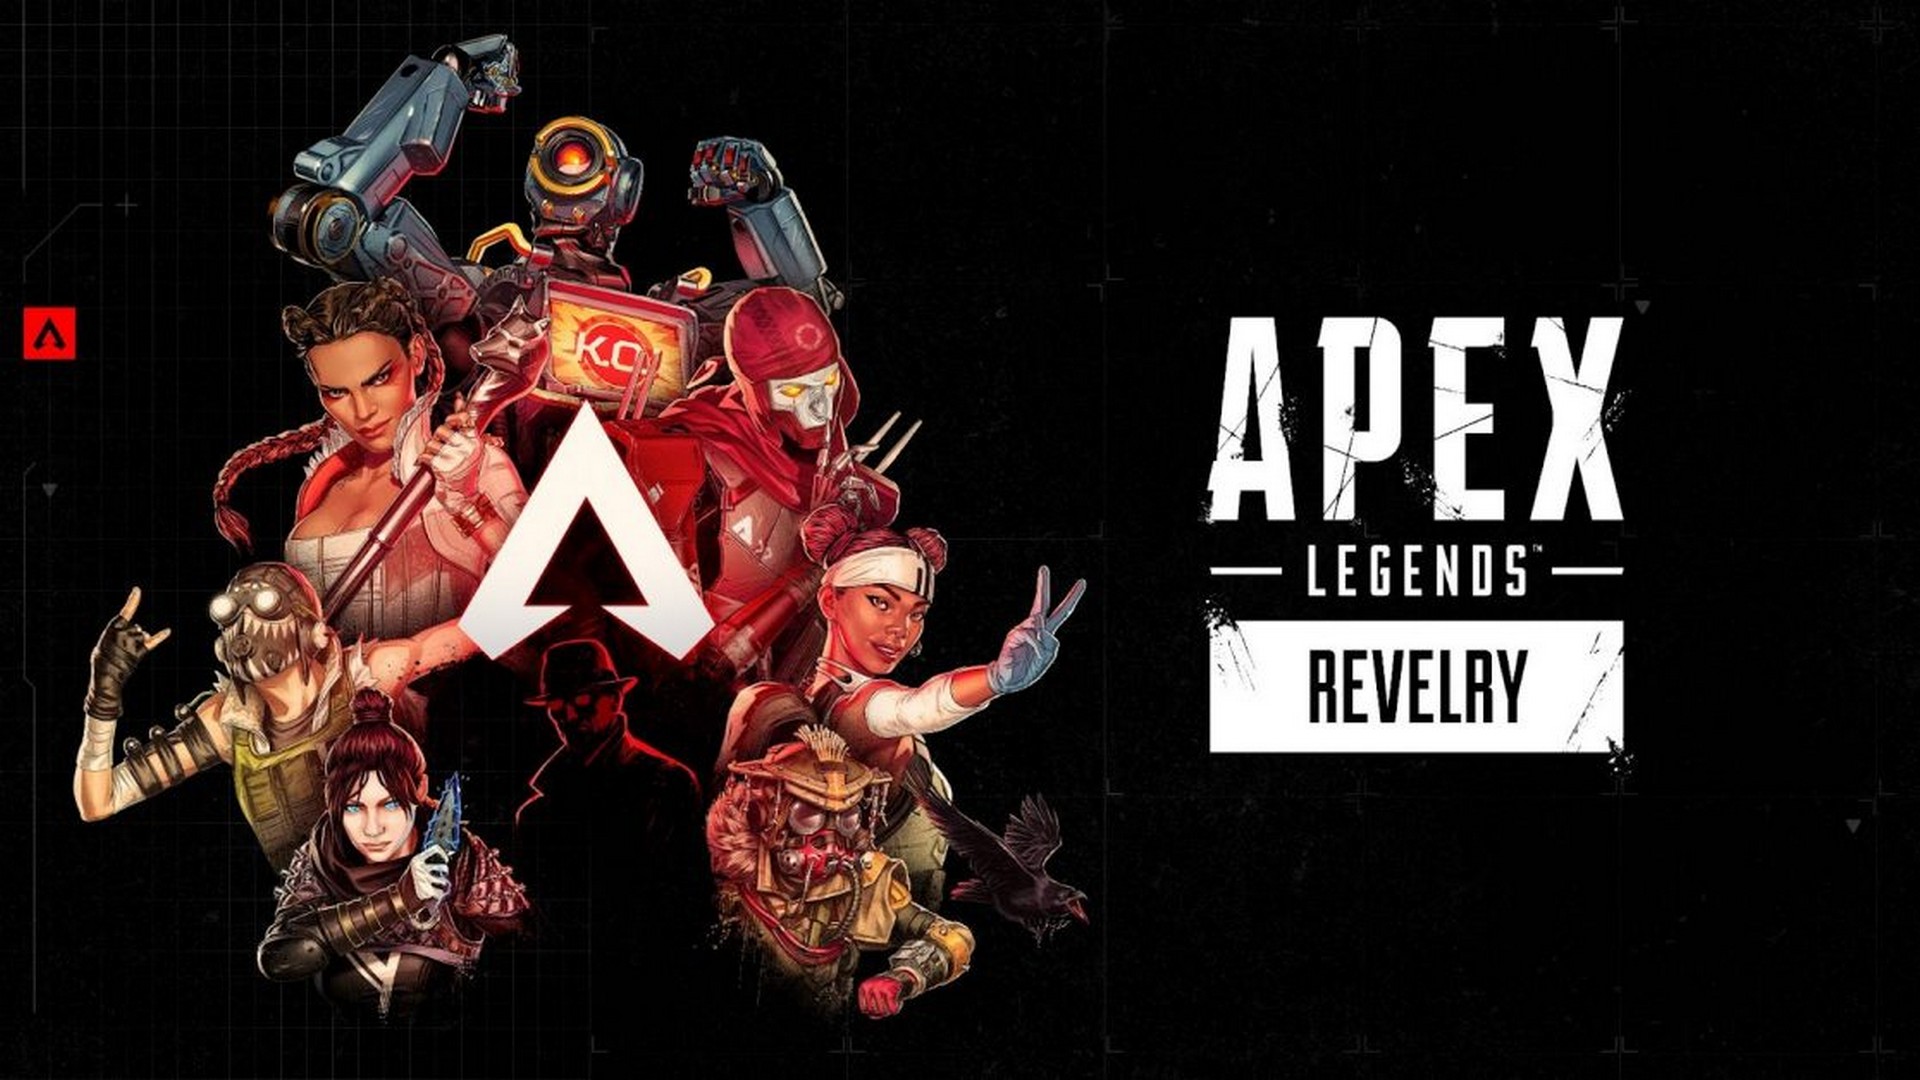 Apex Legends 4th Anniversary Marks a New Era For Globally Beloved Battle Royale, Delivering Its Best Entry Point Yet For New Players